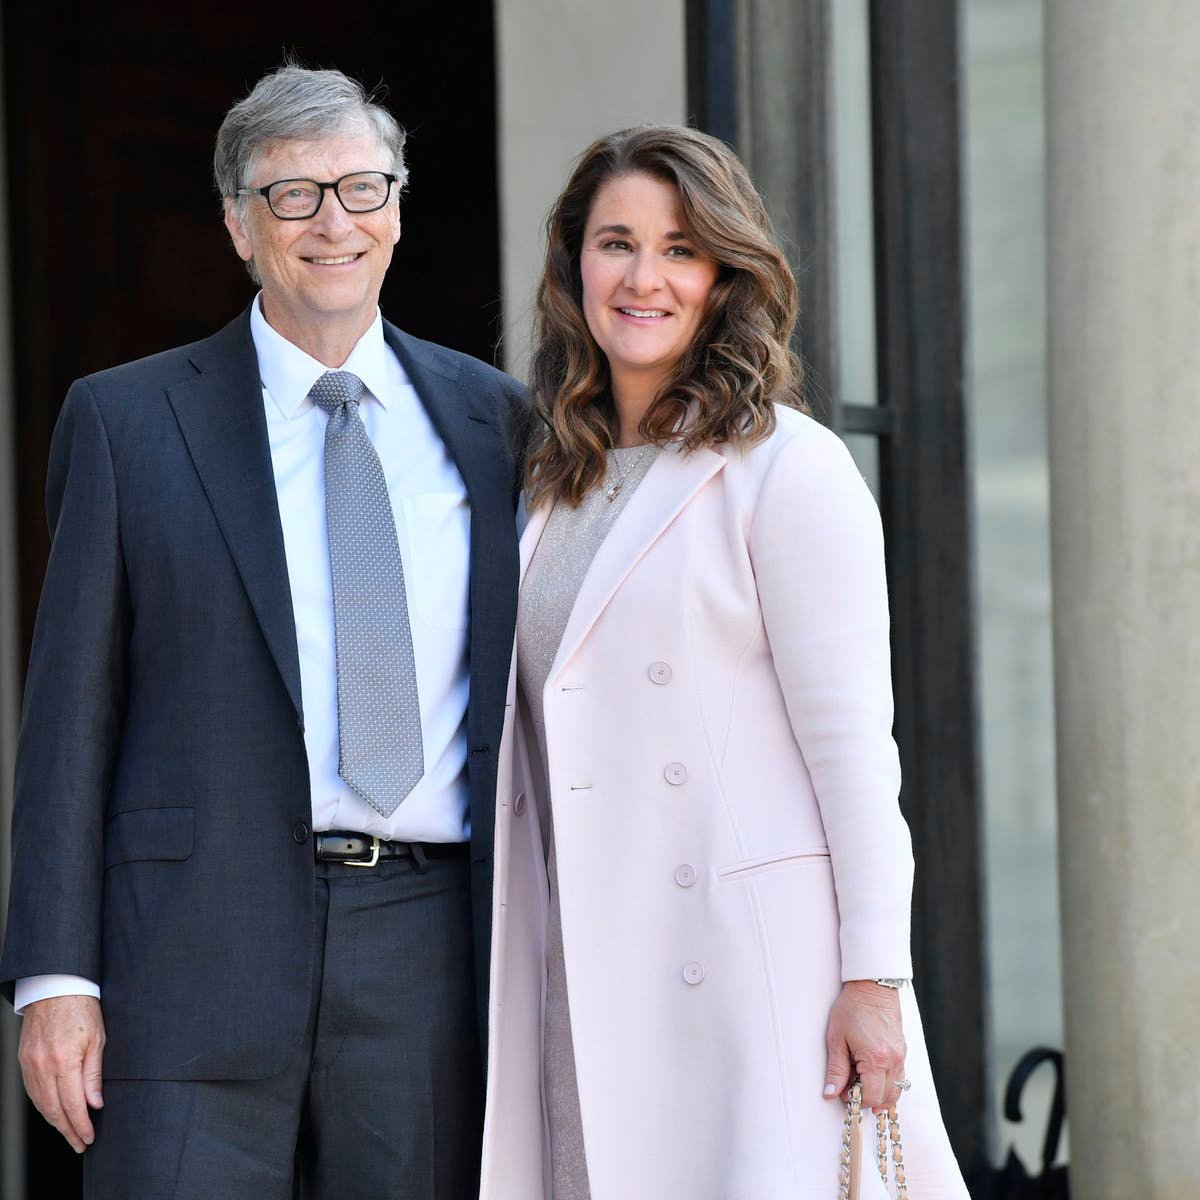 Bill Gates revealed the reason for his divorce from Melinda to his friends